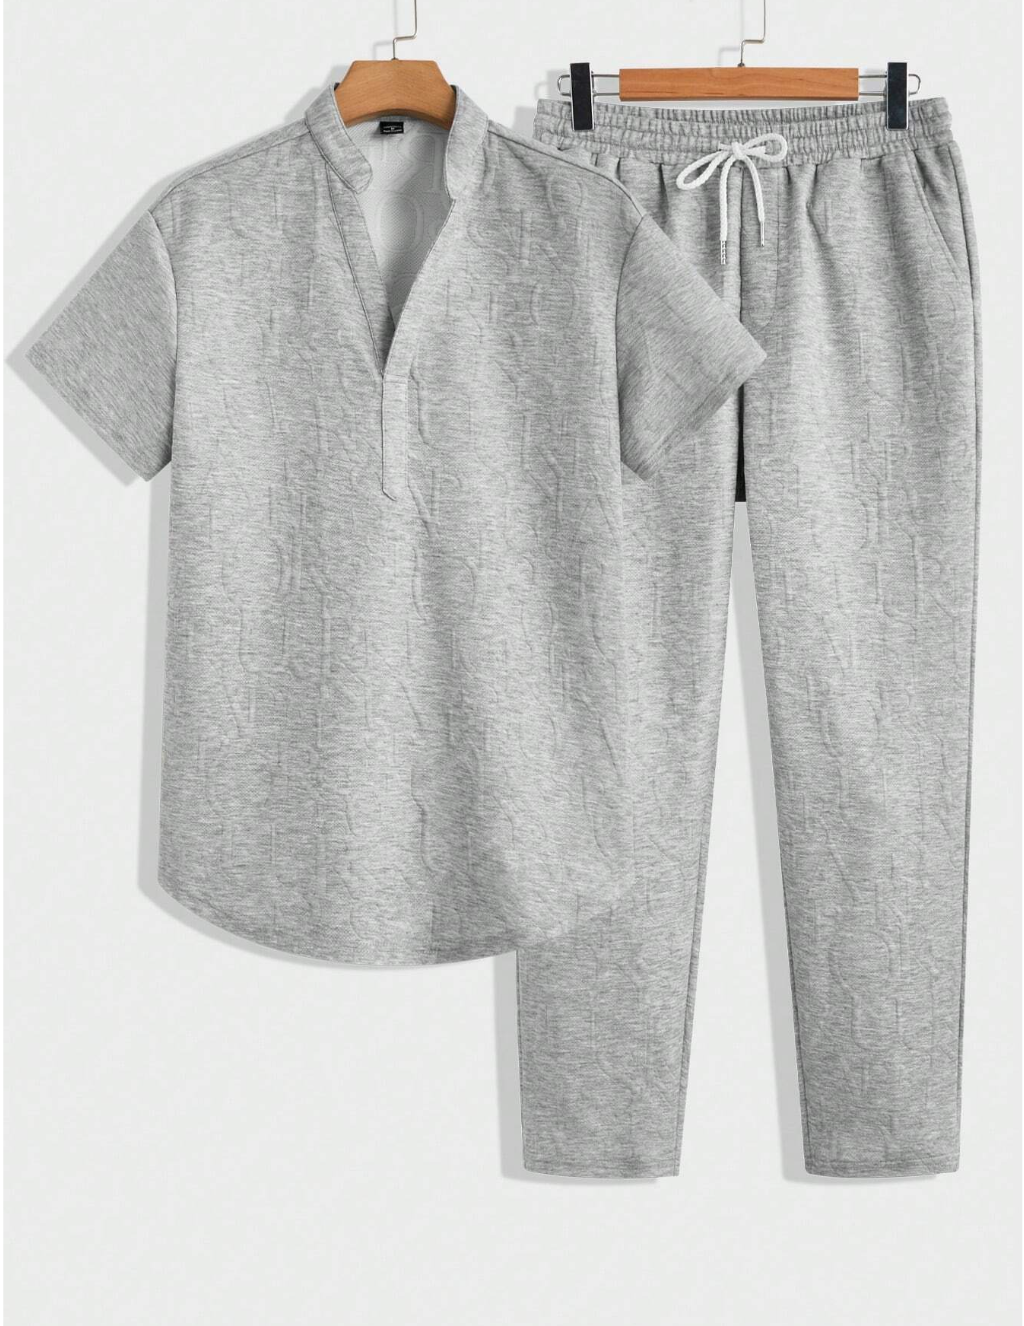 Lettered Luxe: Manfinity Homme's Casual 2-Piece Set for Effortless Style"